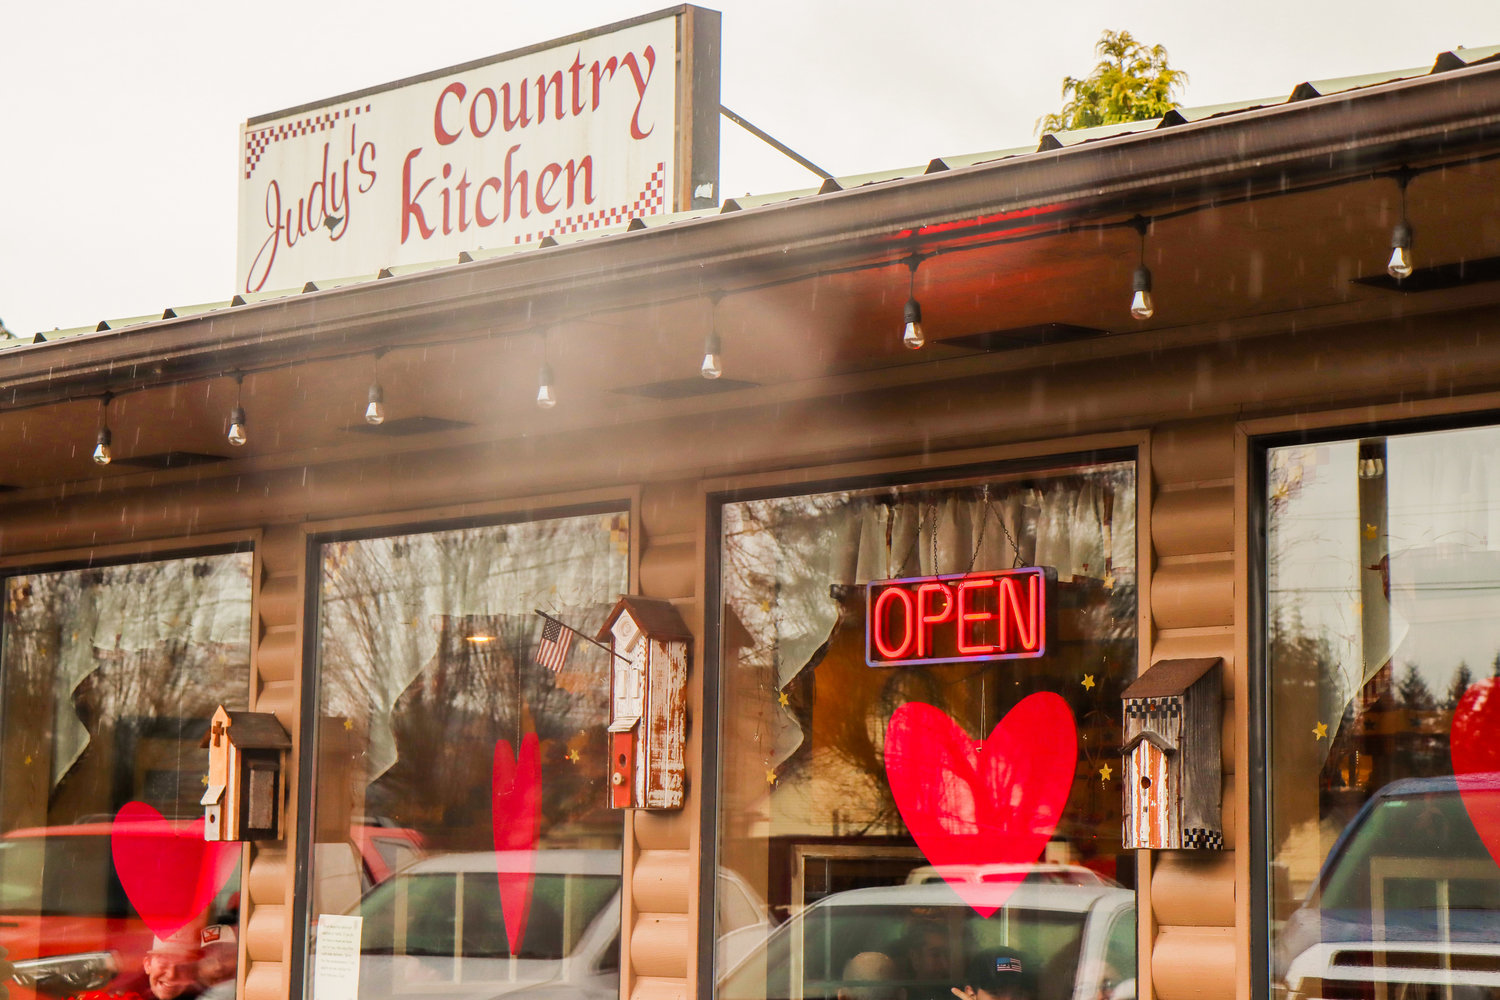 Judy's Country Kitchen is seen open for indoor dining on Monday in Centralia as Lewis County enters Phase 2 of Gov. Jay Inslee's phased reopening plan.